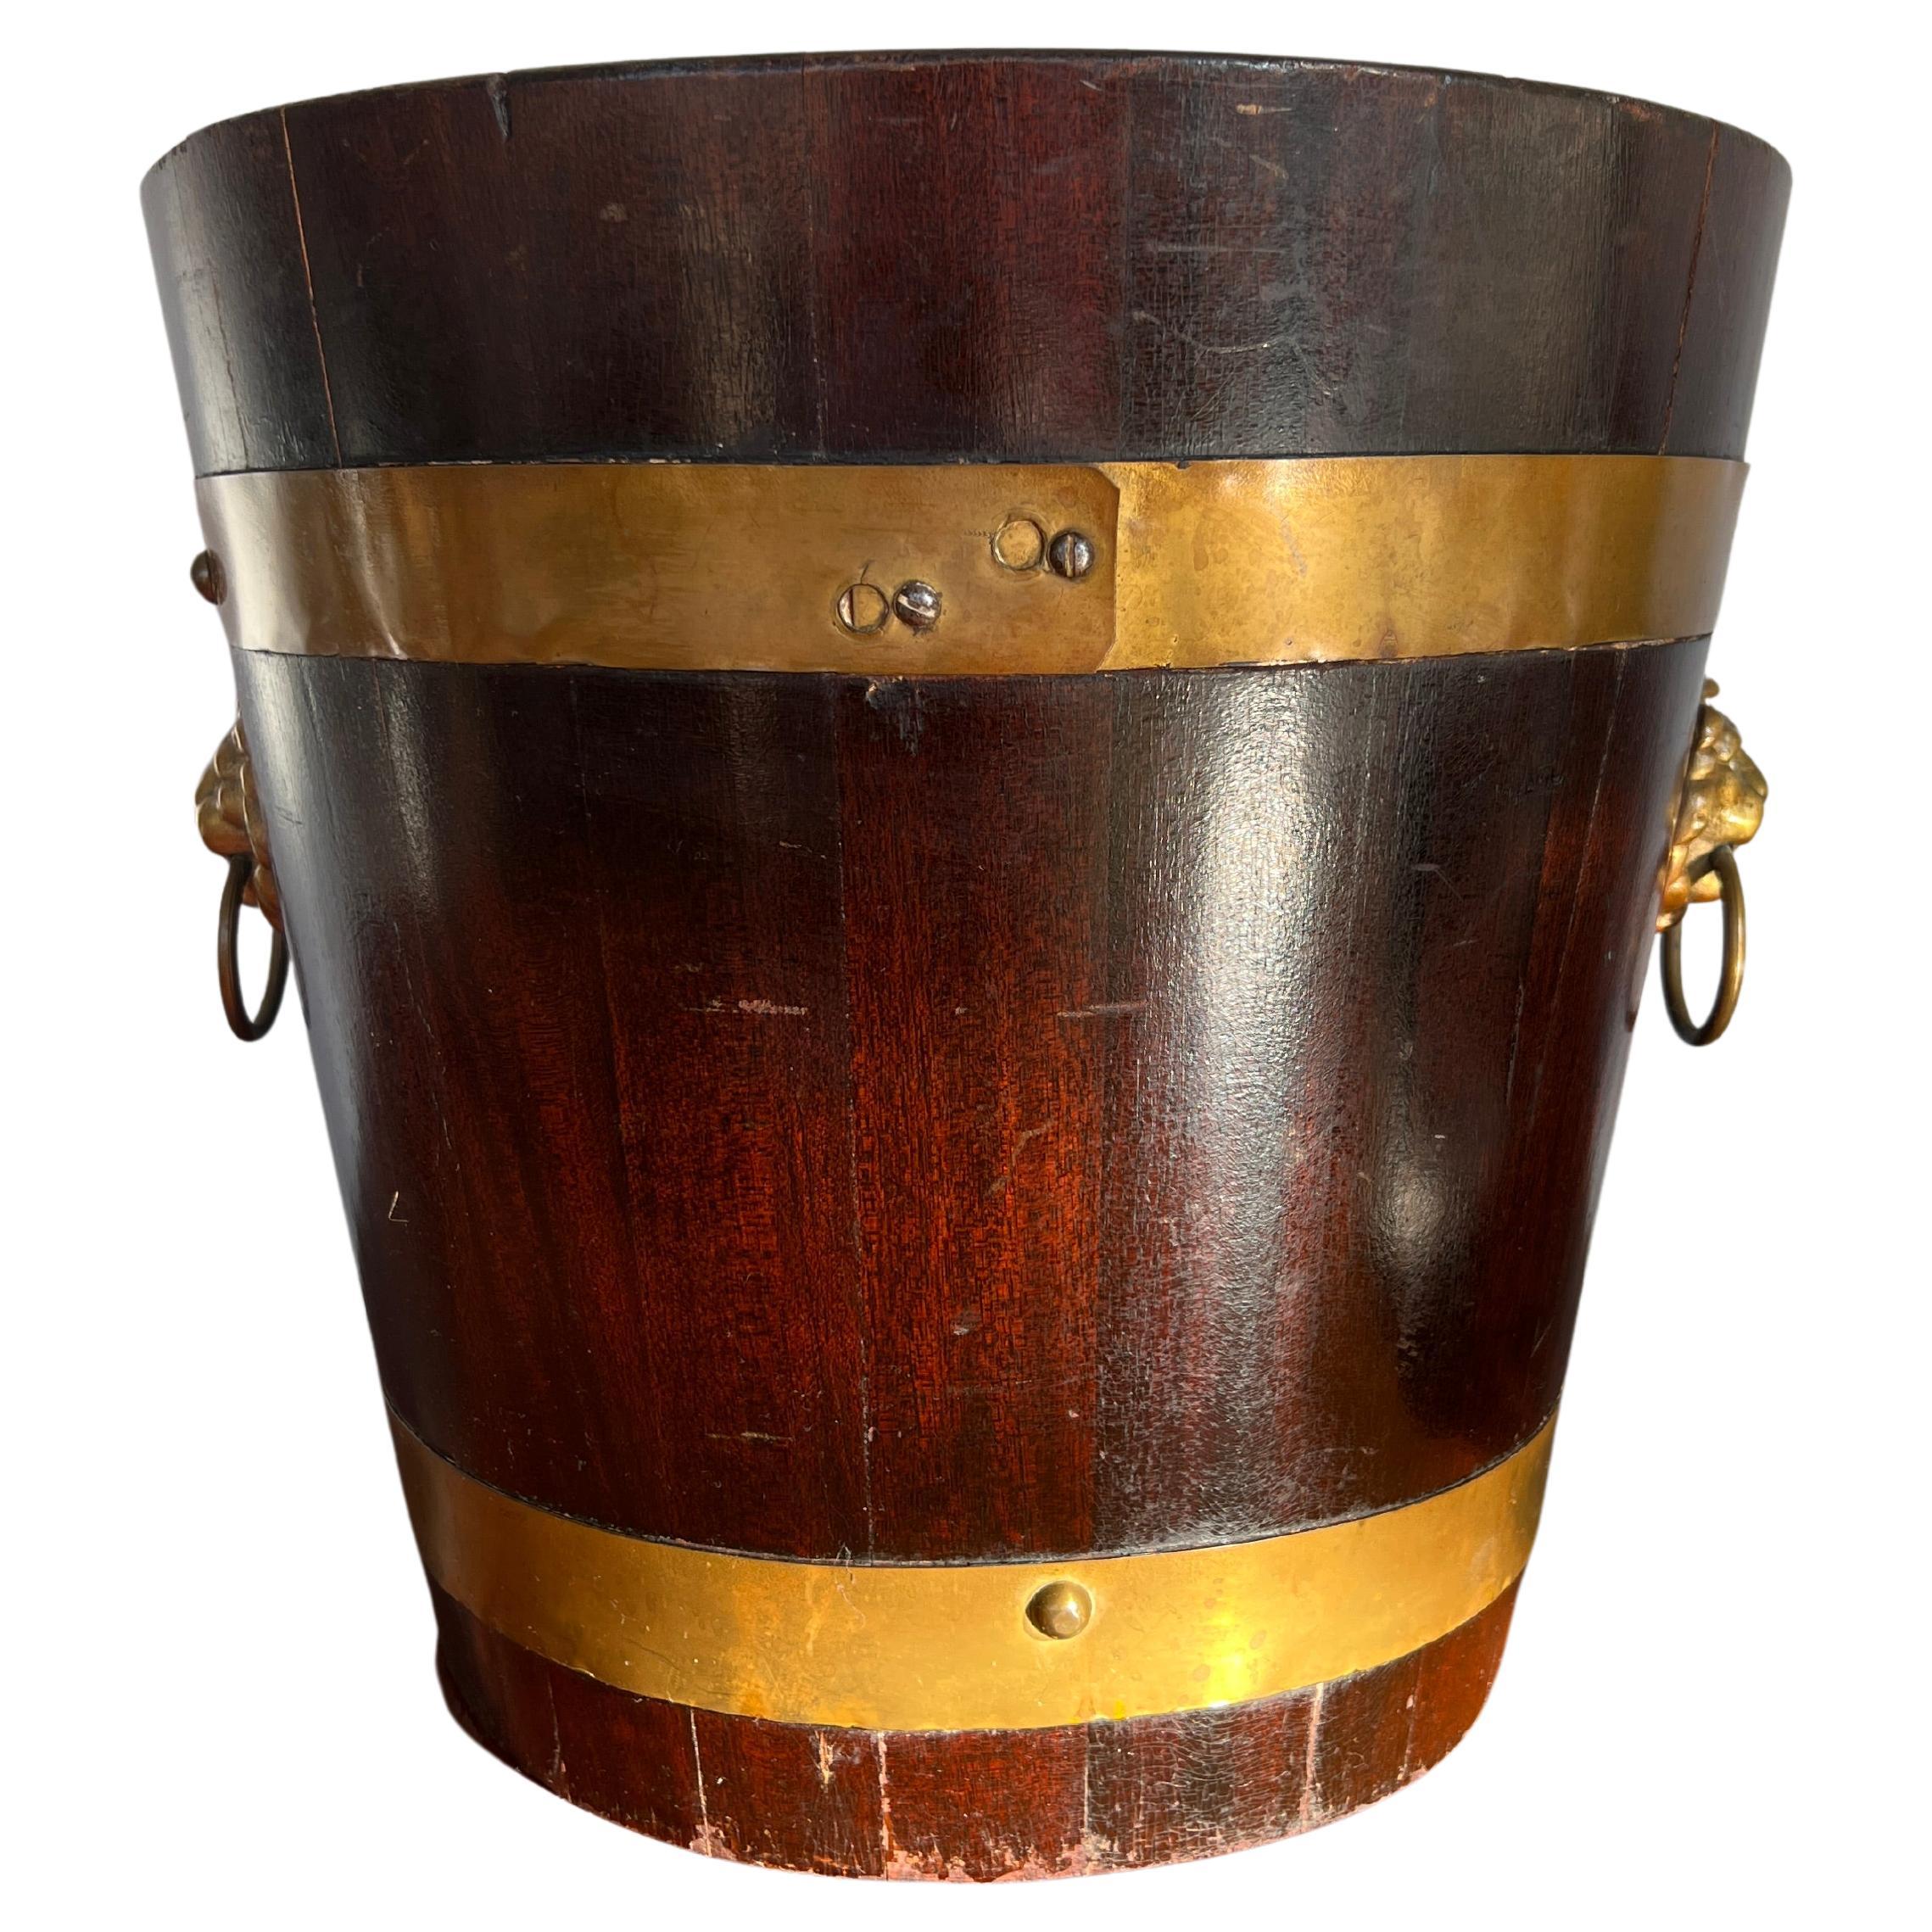 Continental, likely English.

A George III circa 1800 peat, turf, coal or kindling bucket of round form and confirming body mounted with brass straps and lion form handles. Works great against a fireplace or repurposed as a waste bin.